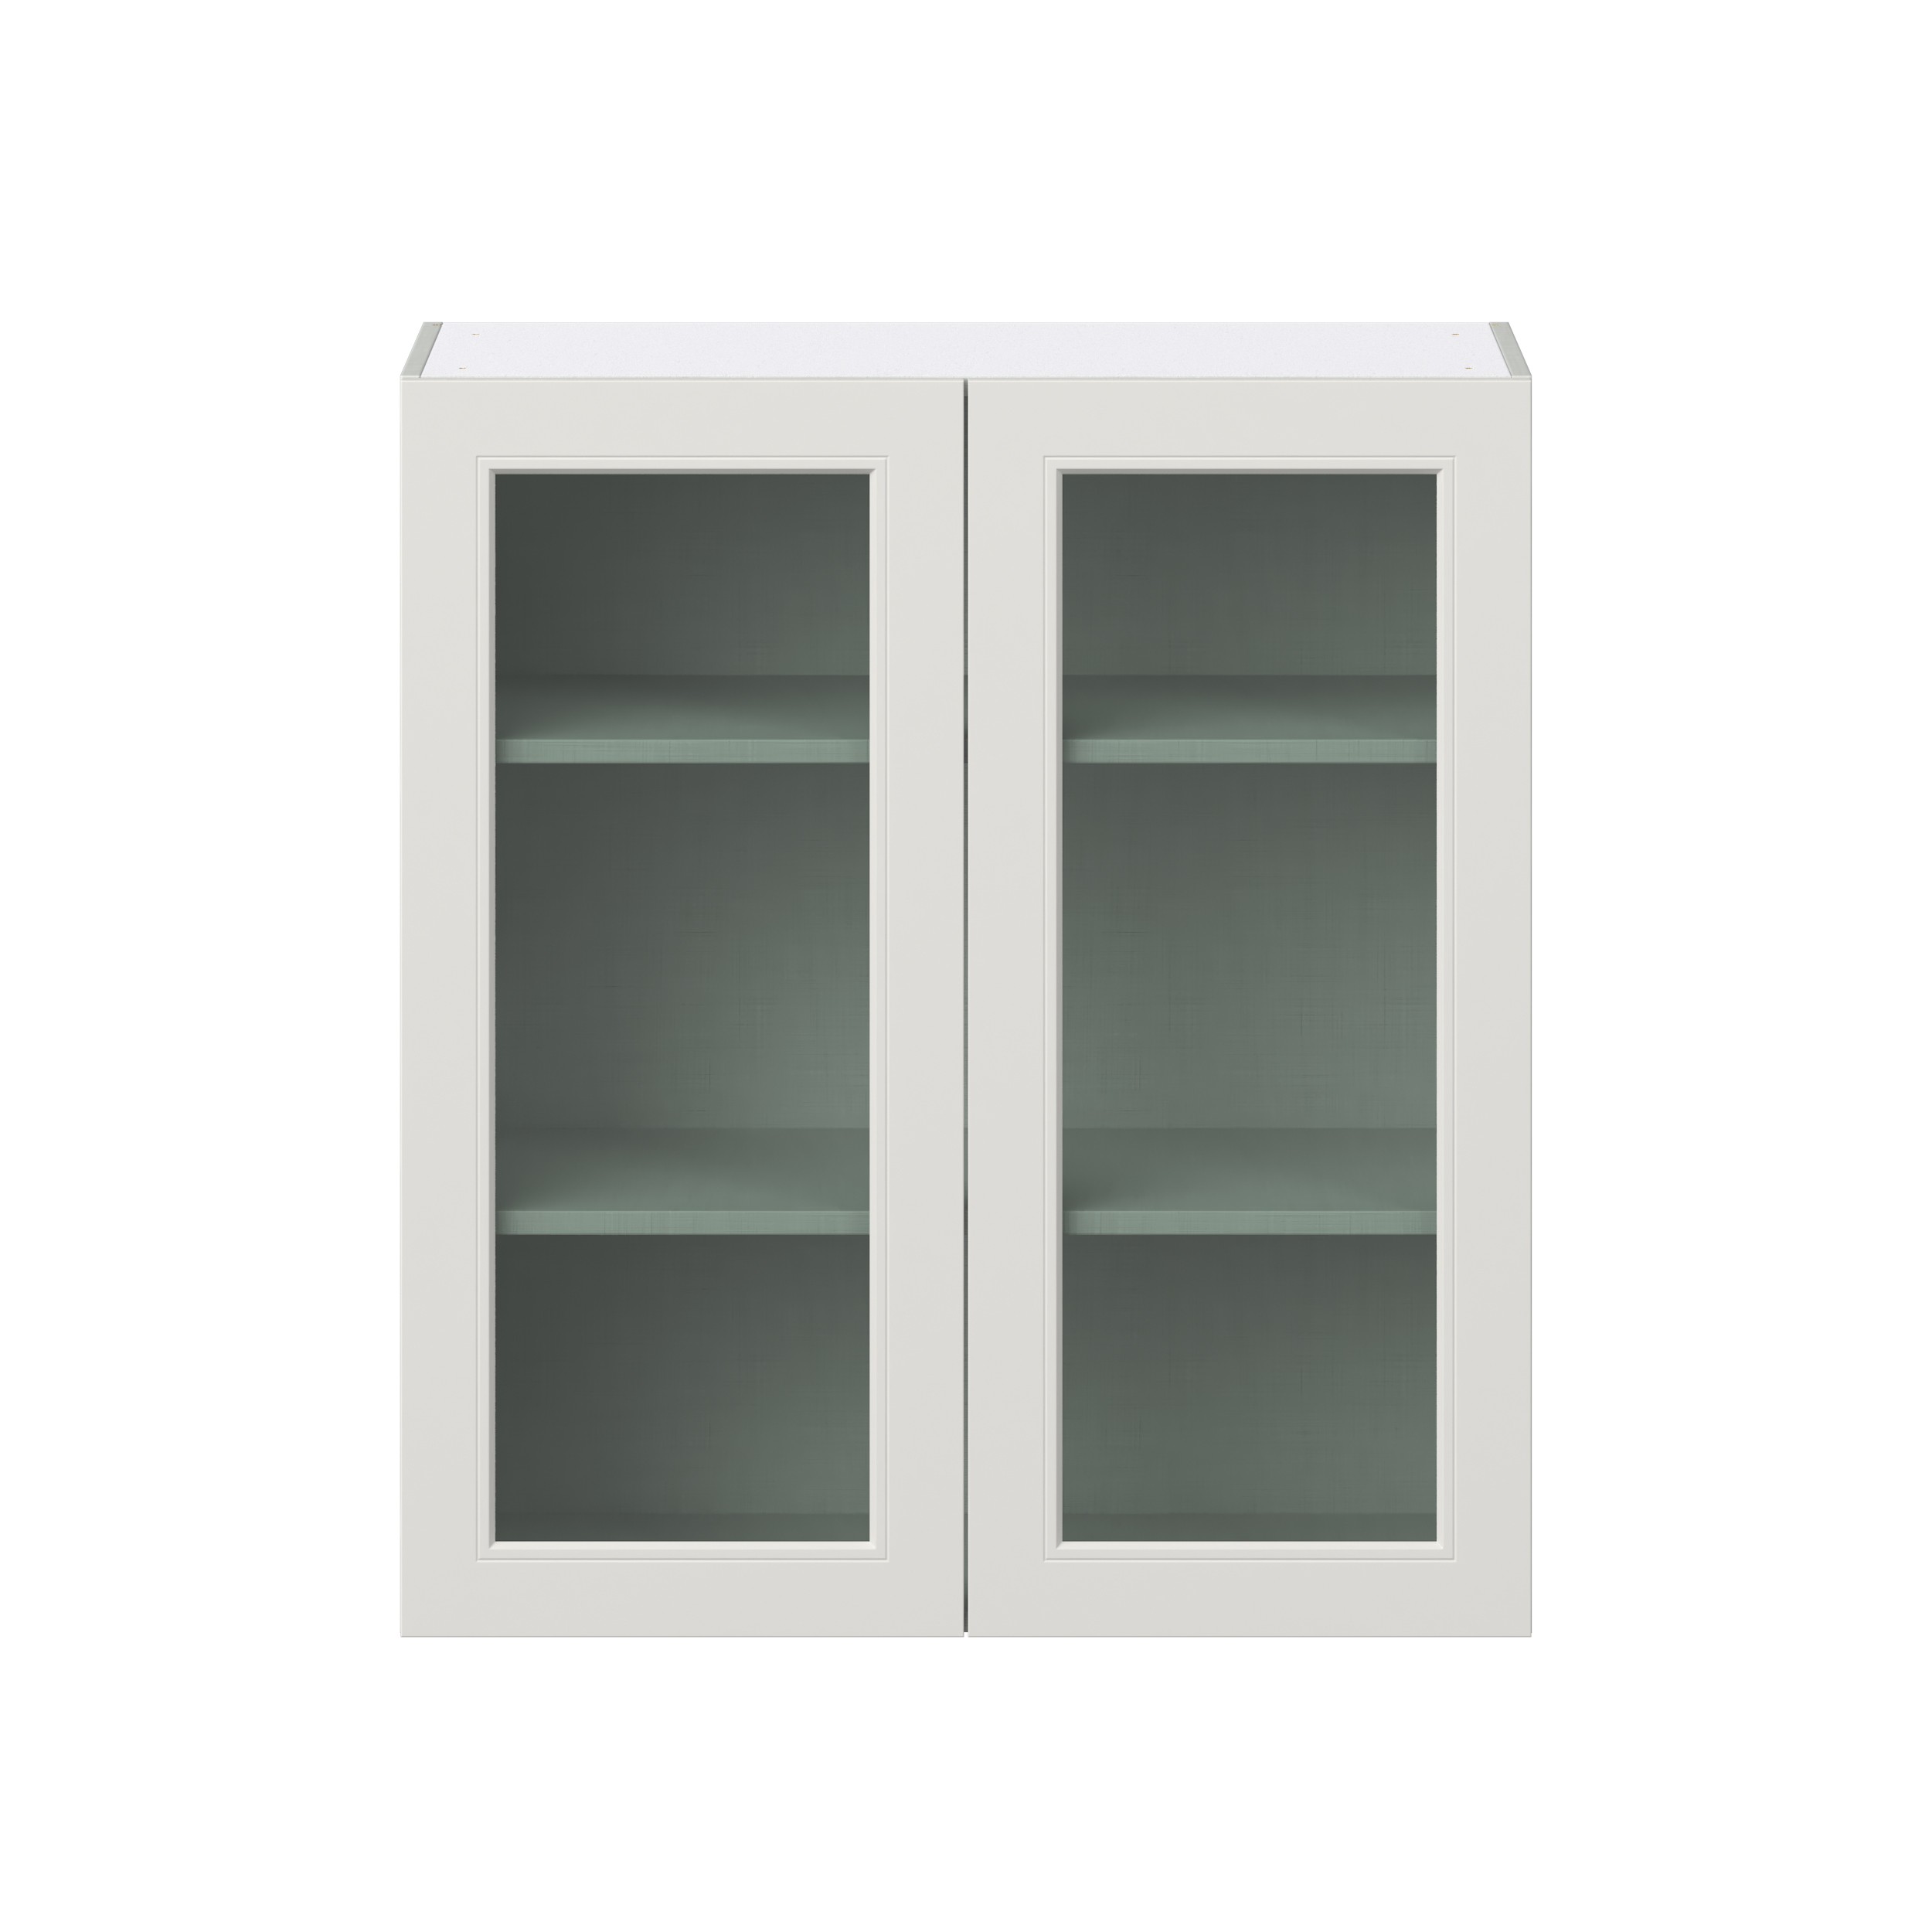 Wisteria Painted Light Gray Recessed Assembled Wall Cabinet with 2 Glass Door (36 in. W x 40 in. H x 14 in. D)